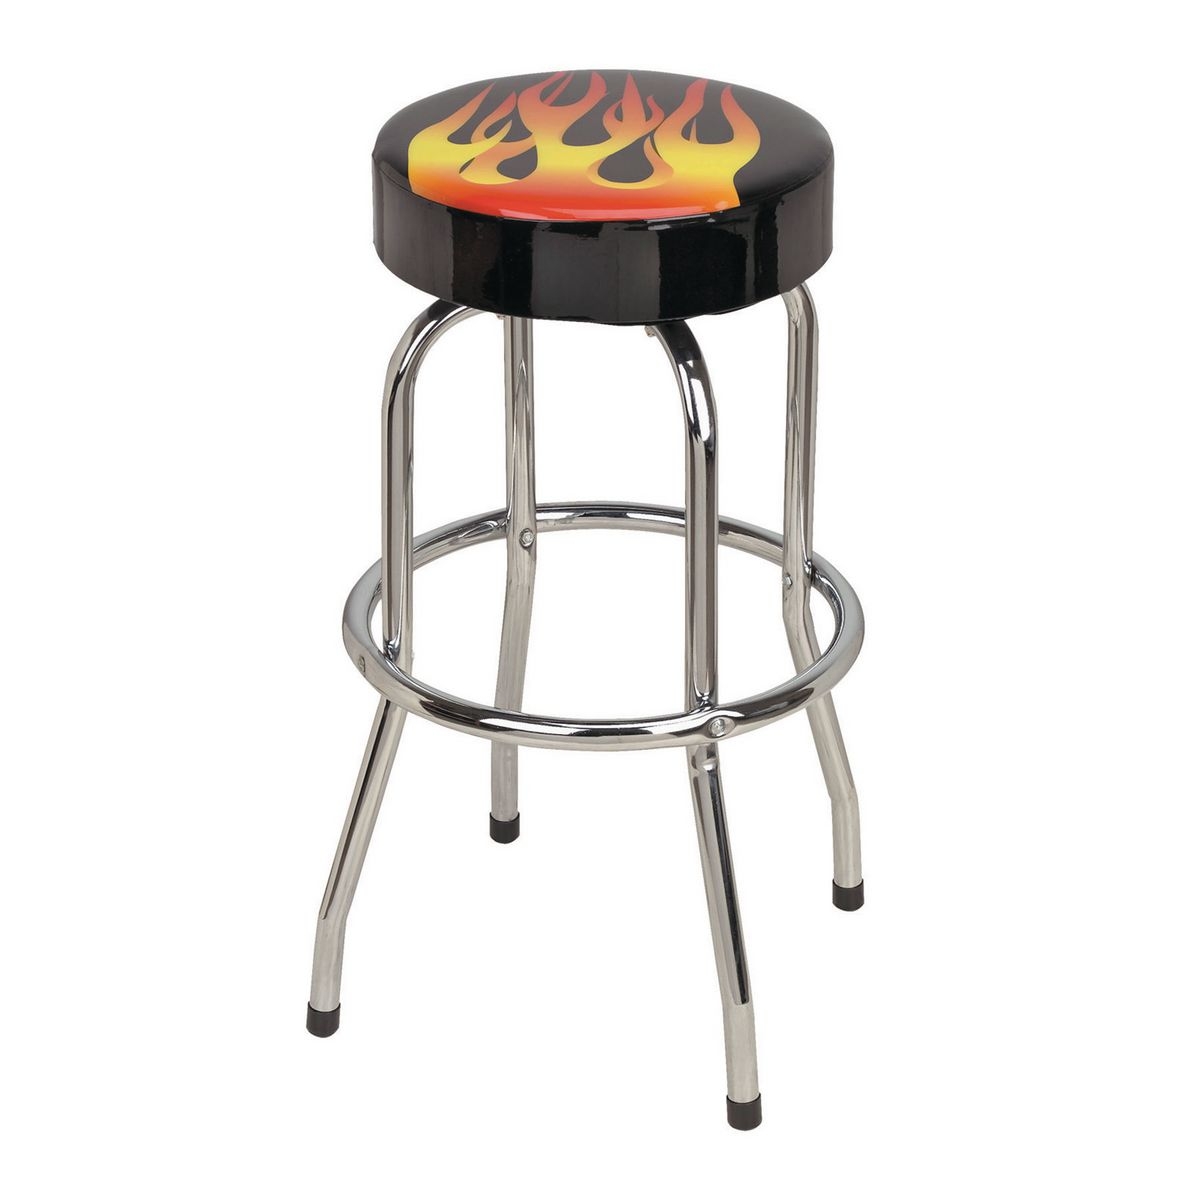 PITTSBURGH AUTOMOTIVE Bar/Counter Swivel Stool with Flame Design – Item